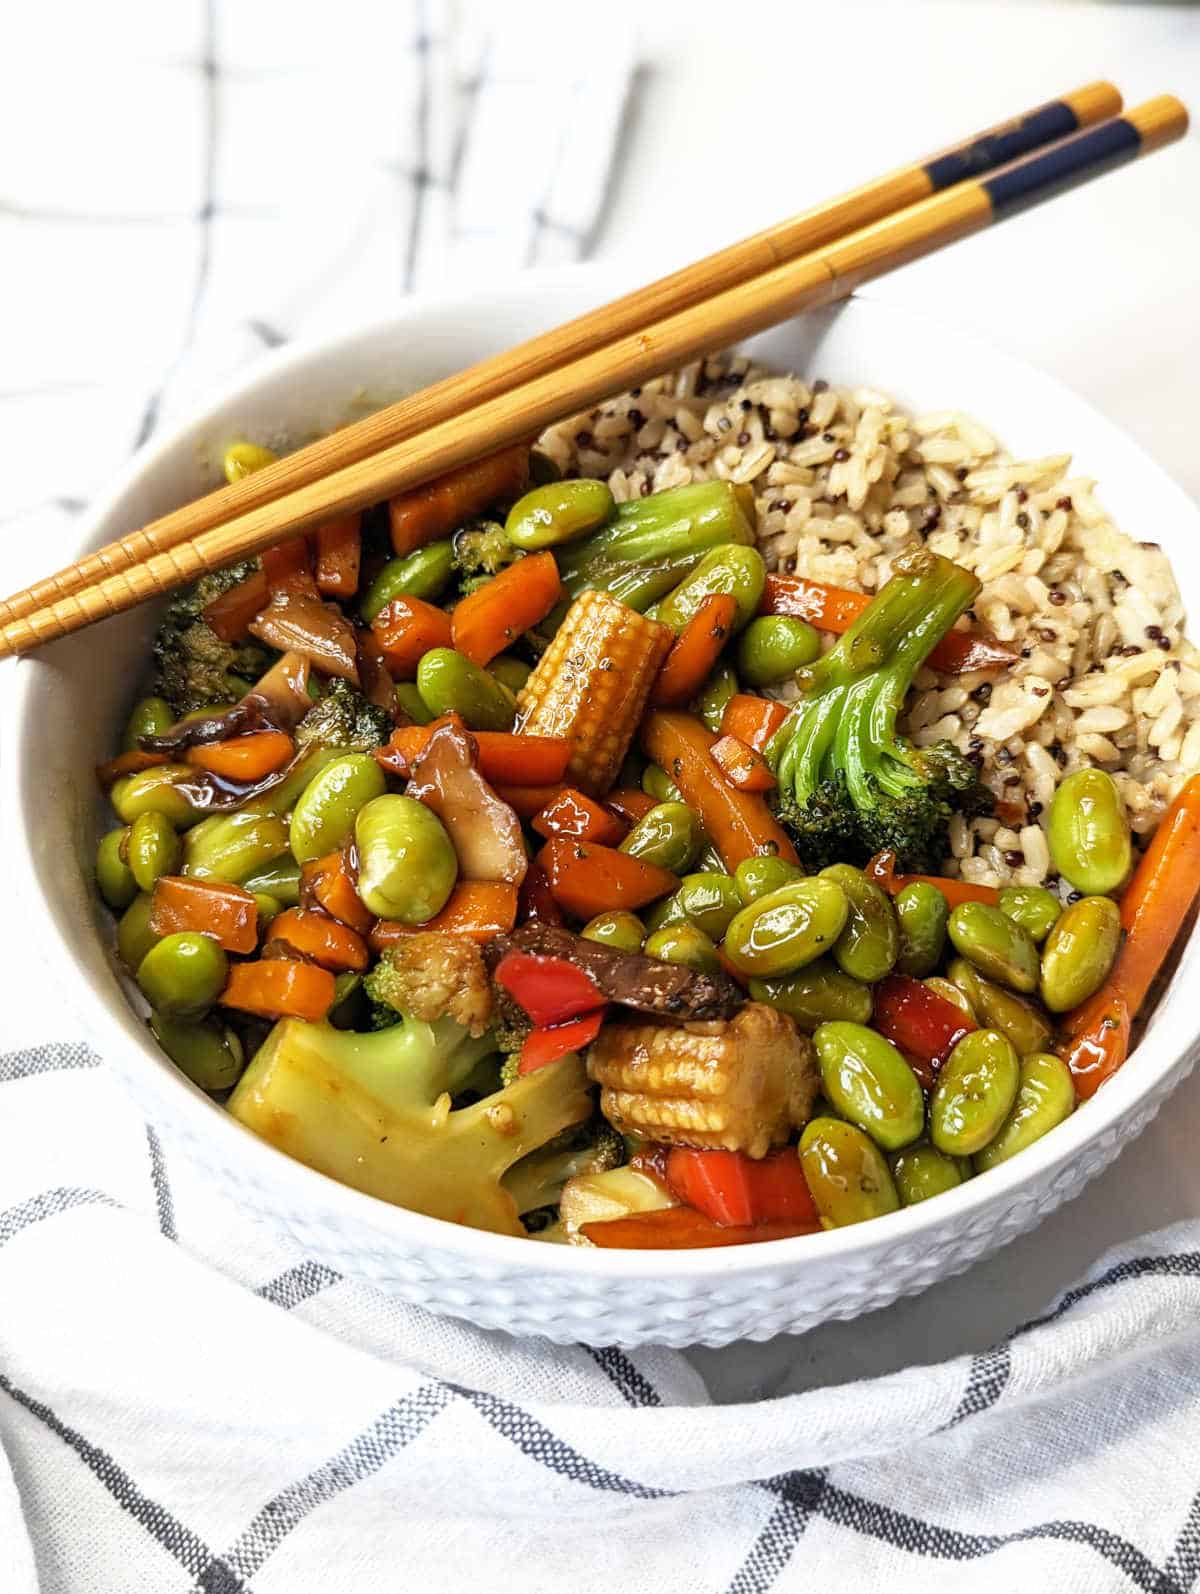 Stir fried vegetables and rice coated with vegan stir fry sauce in a bowl with chopsticks.